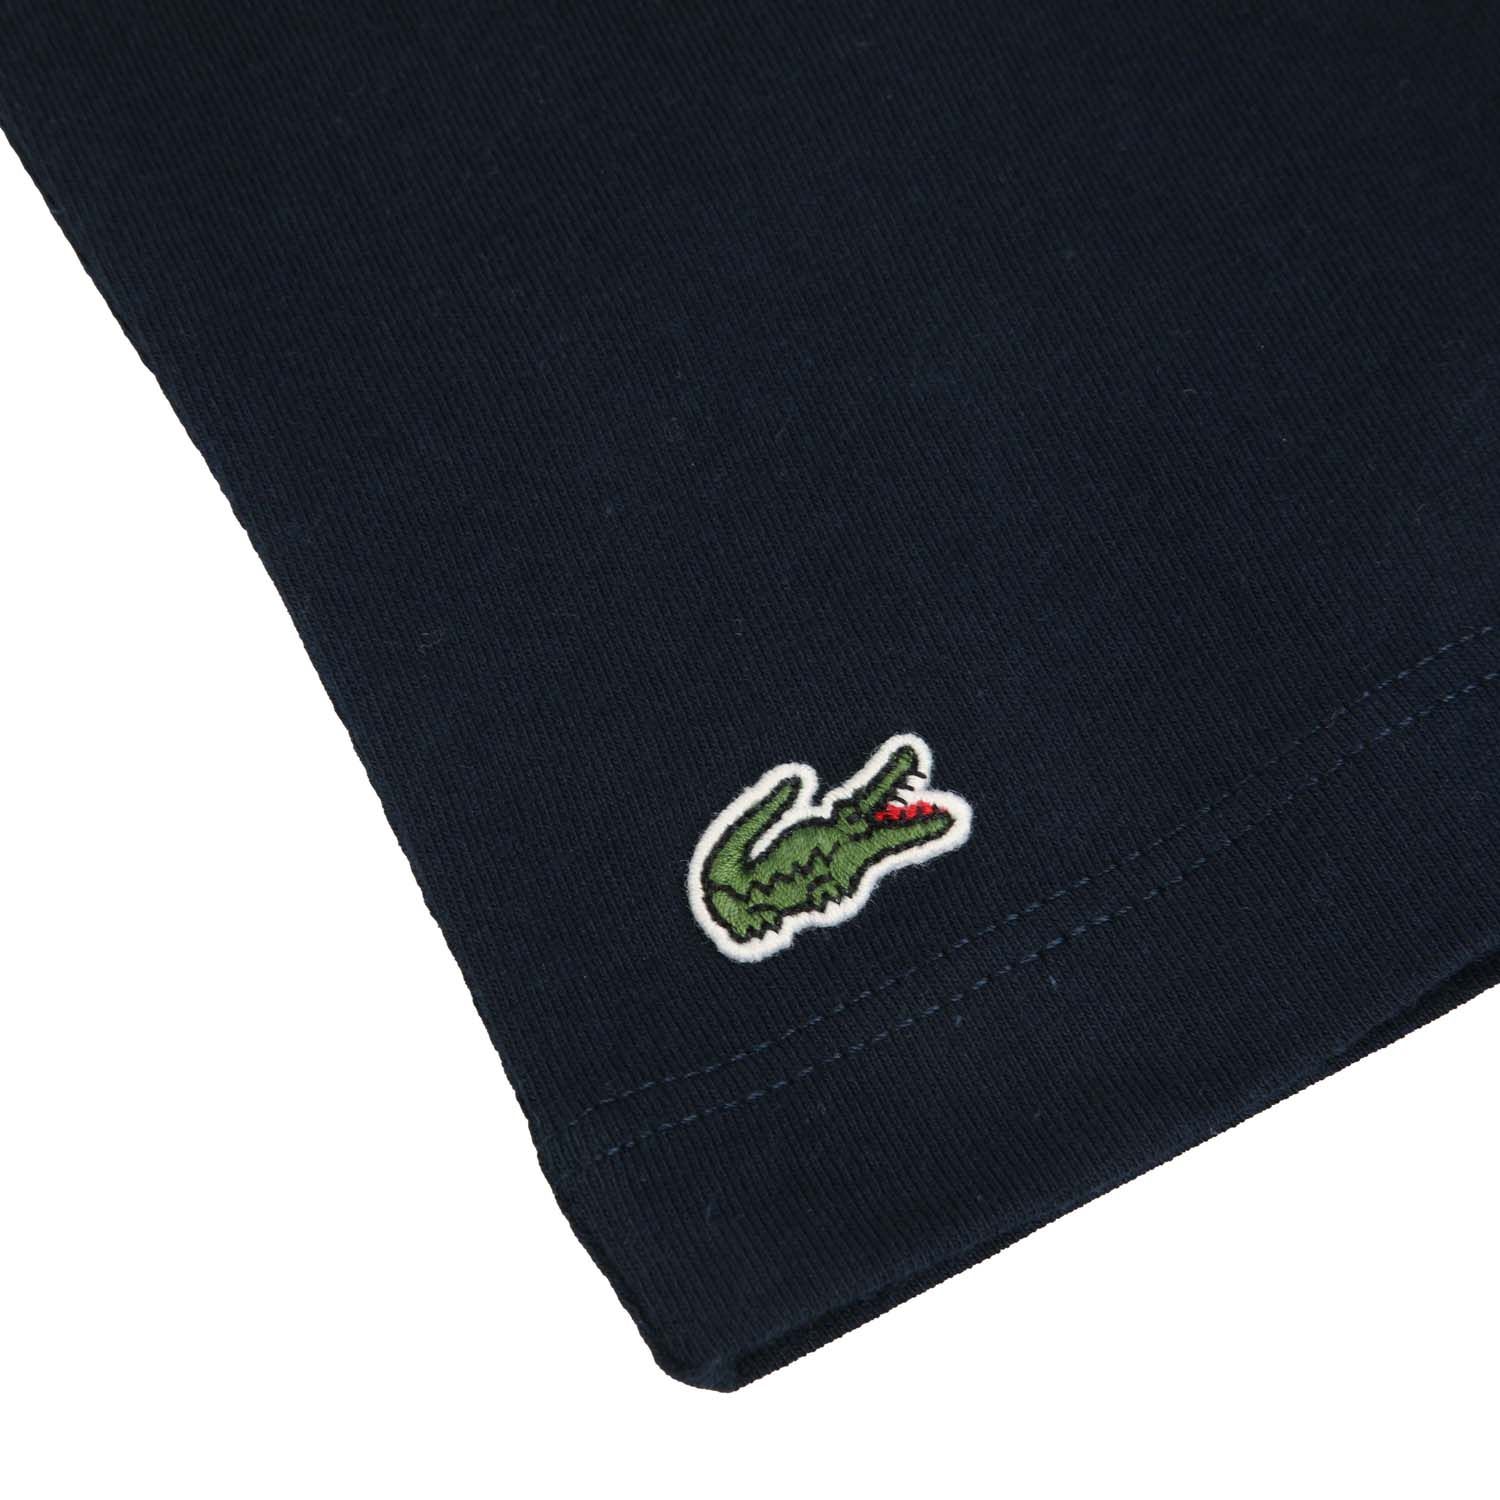 Navy Lacoste Boys Printed Cotton Jersey T-Shirt - Get The Label